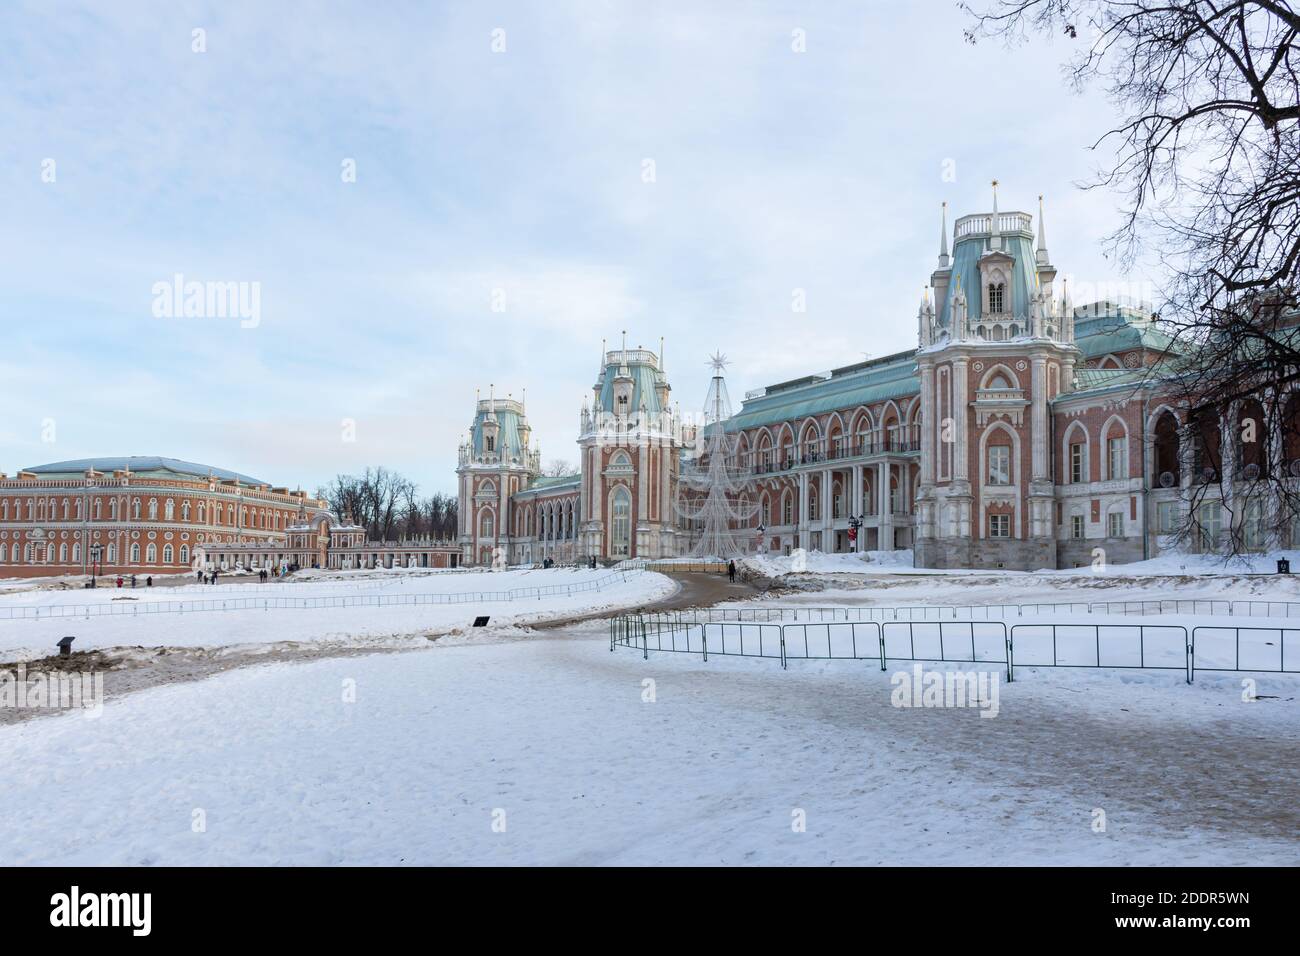 Tsaritsyno Park - Museum in the winter of February 08, 2019. State historical and architectural Museum-reserve. View of the main facade of the Palace. Stock Photo